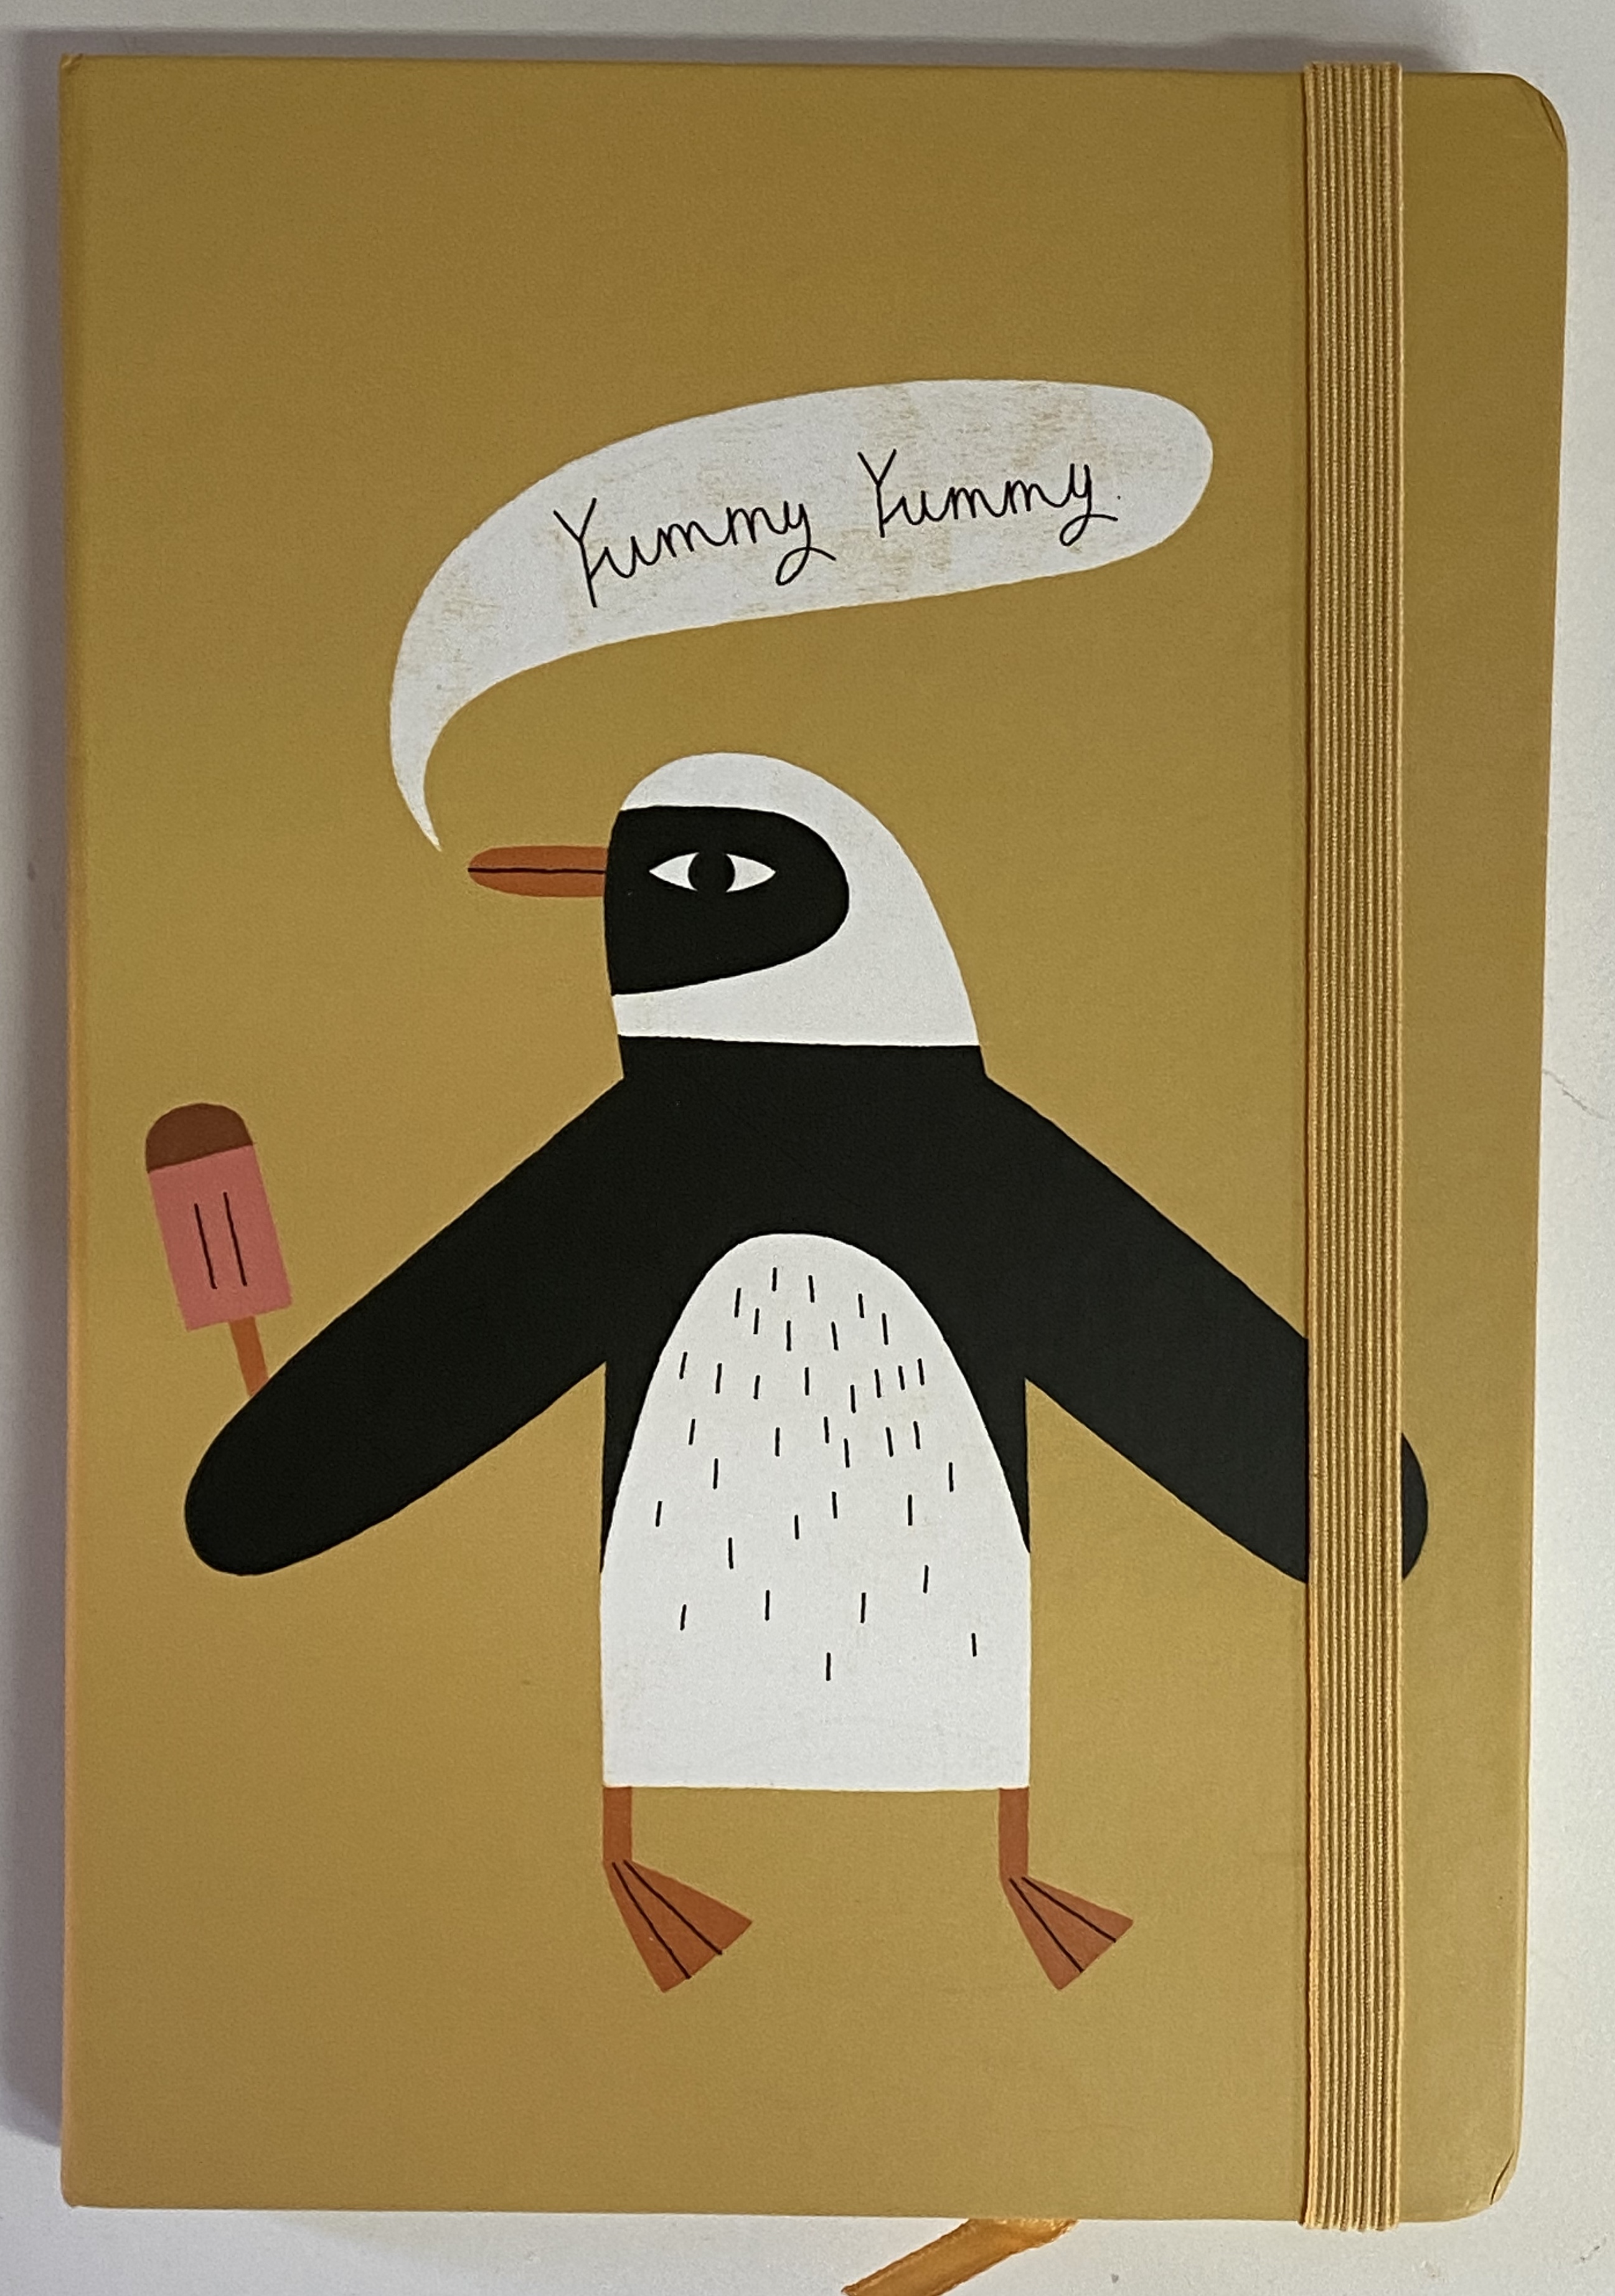 yummy-penguin-notebook-a5